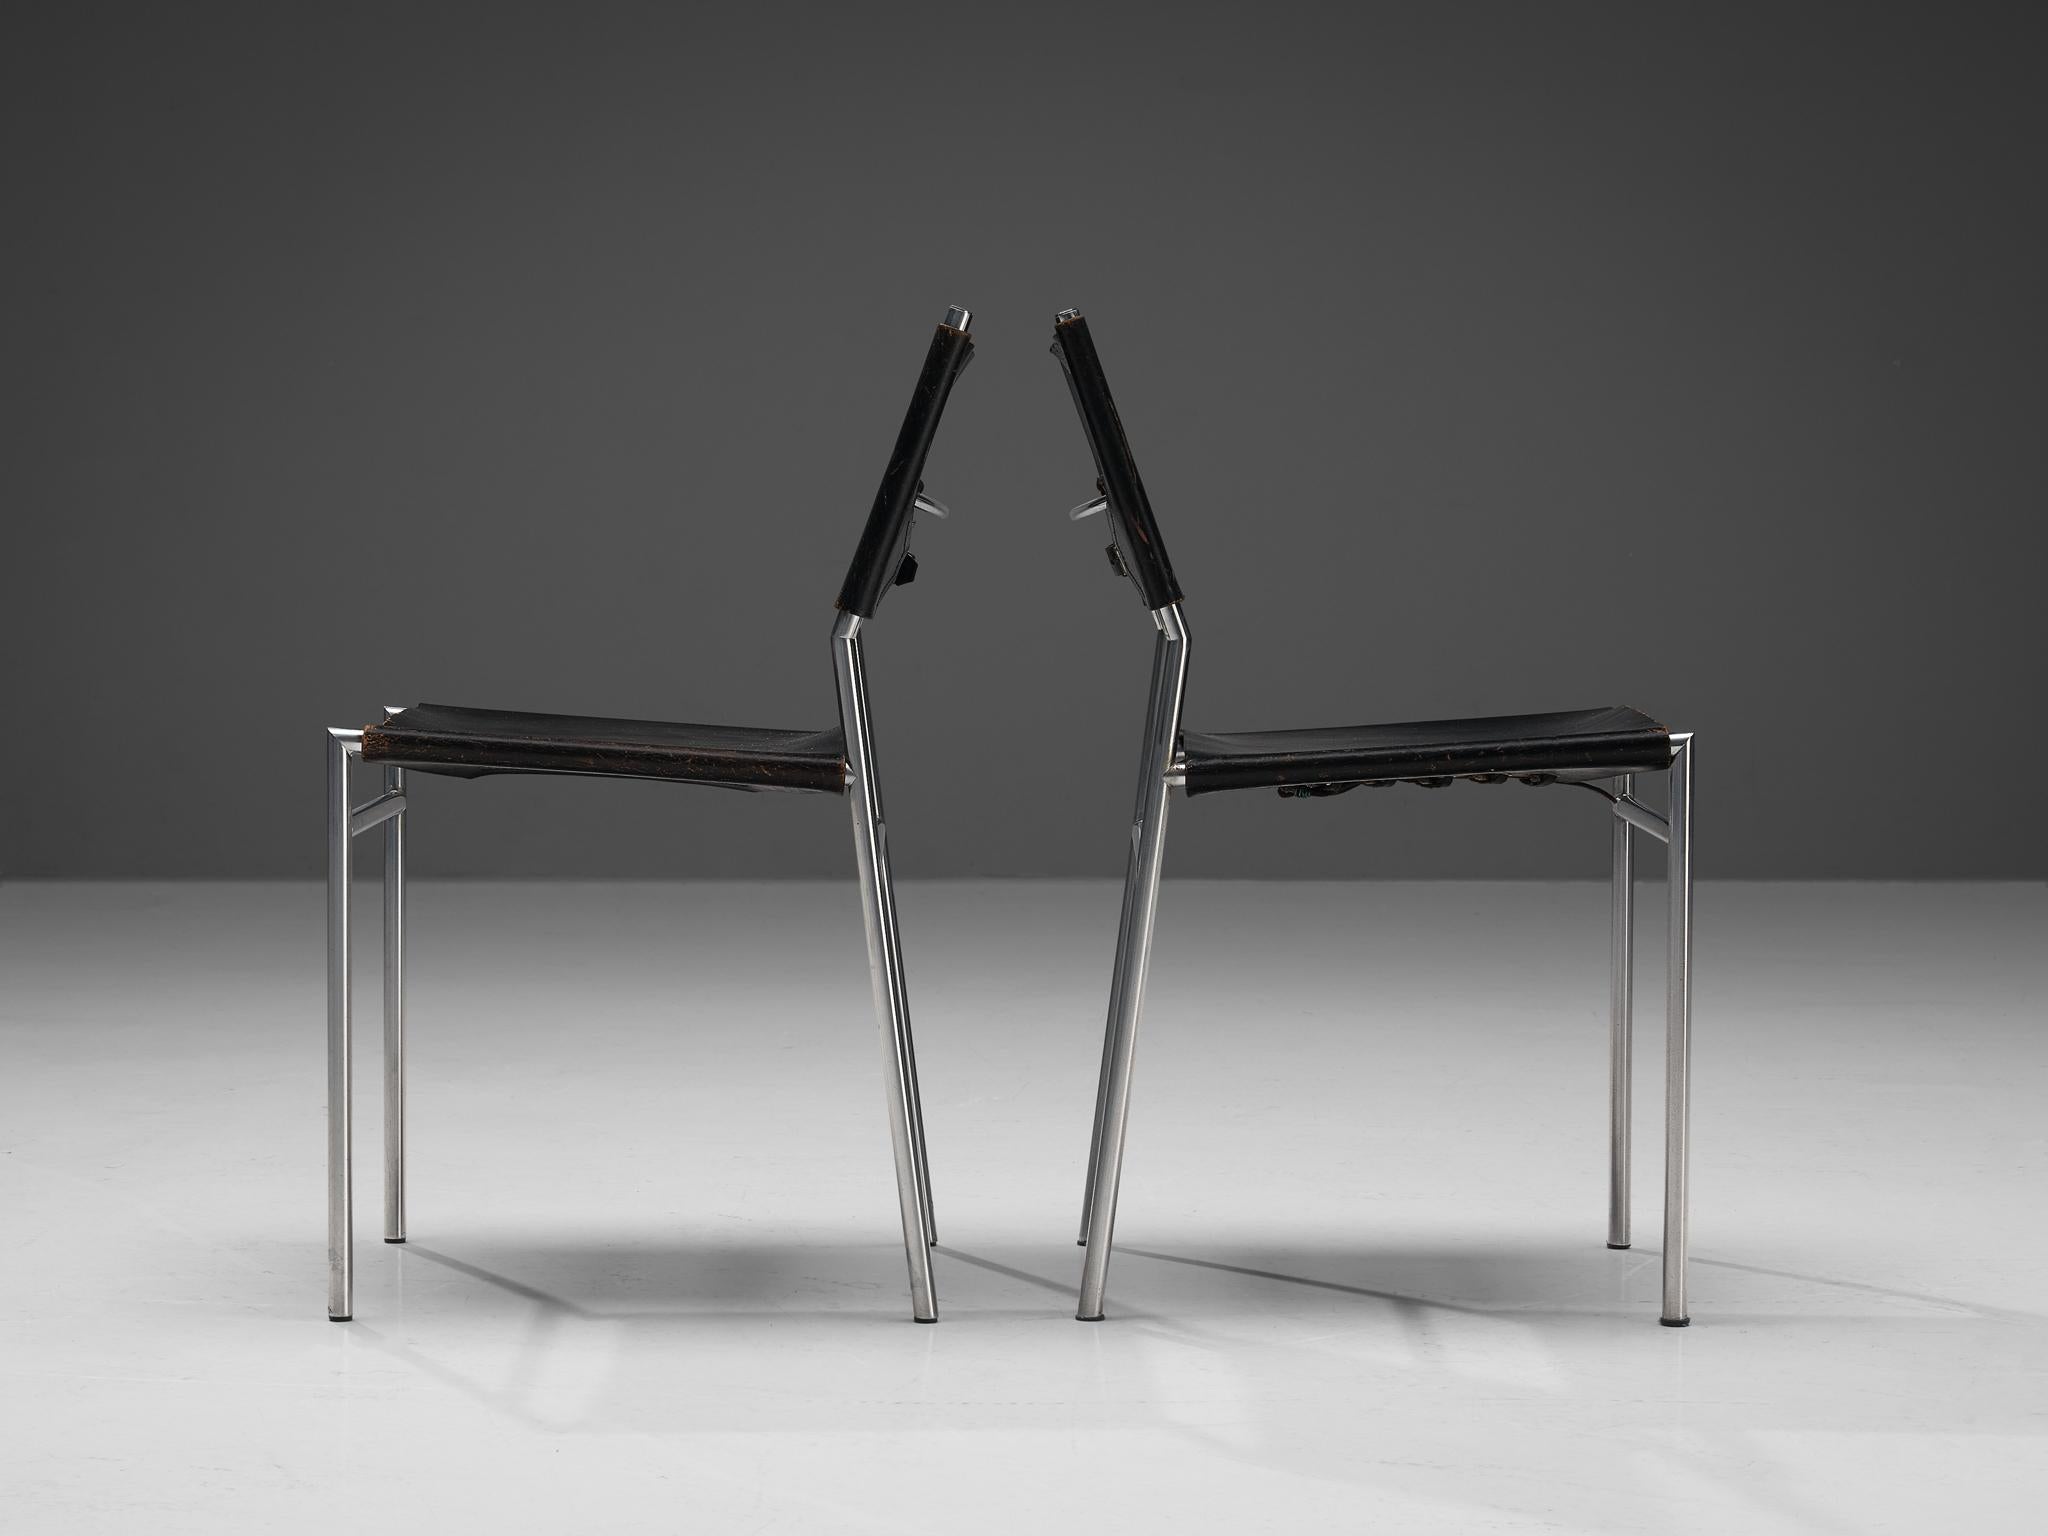 Martin Visser for 't Spectrum, pair of dining room chairs, steel, patinated leather, The Netherlands, 1960s. 

The designs of Martin Visser are characterized by clear lines and the use of metal in combination with natural materials like leather or